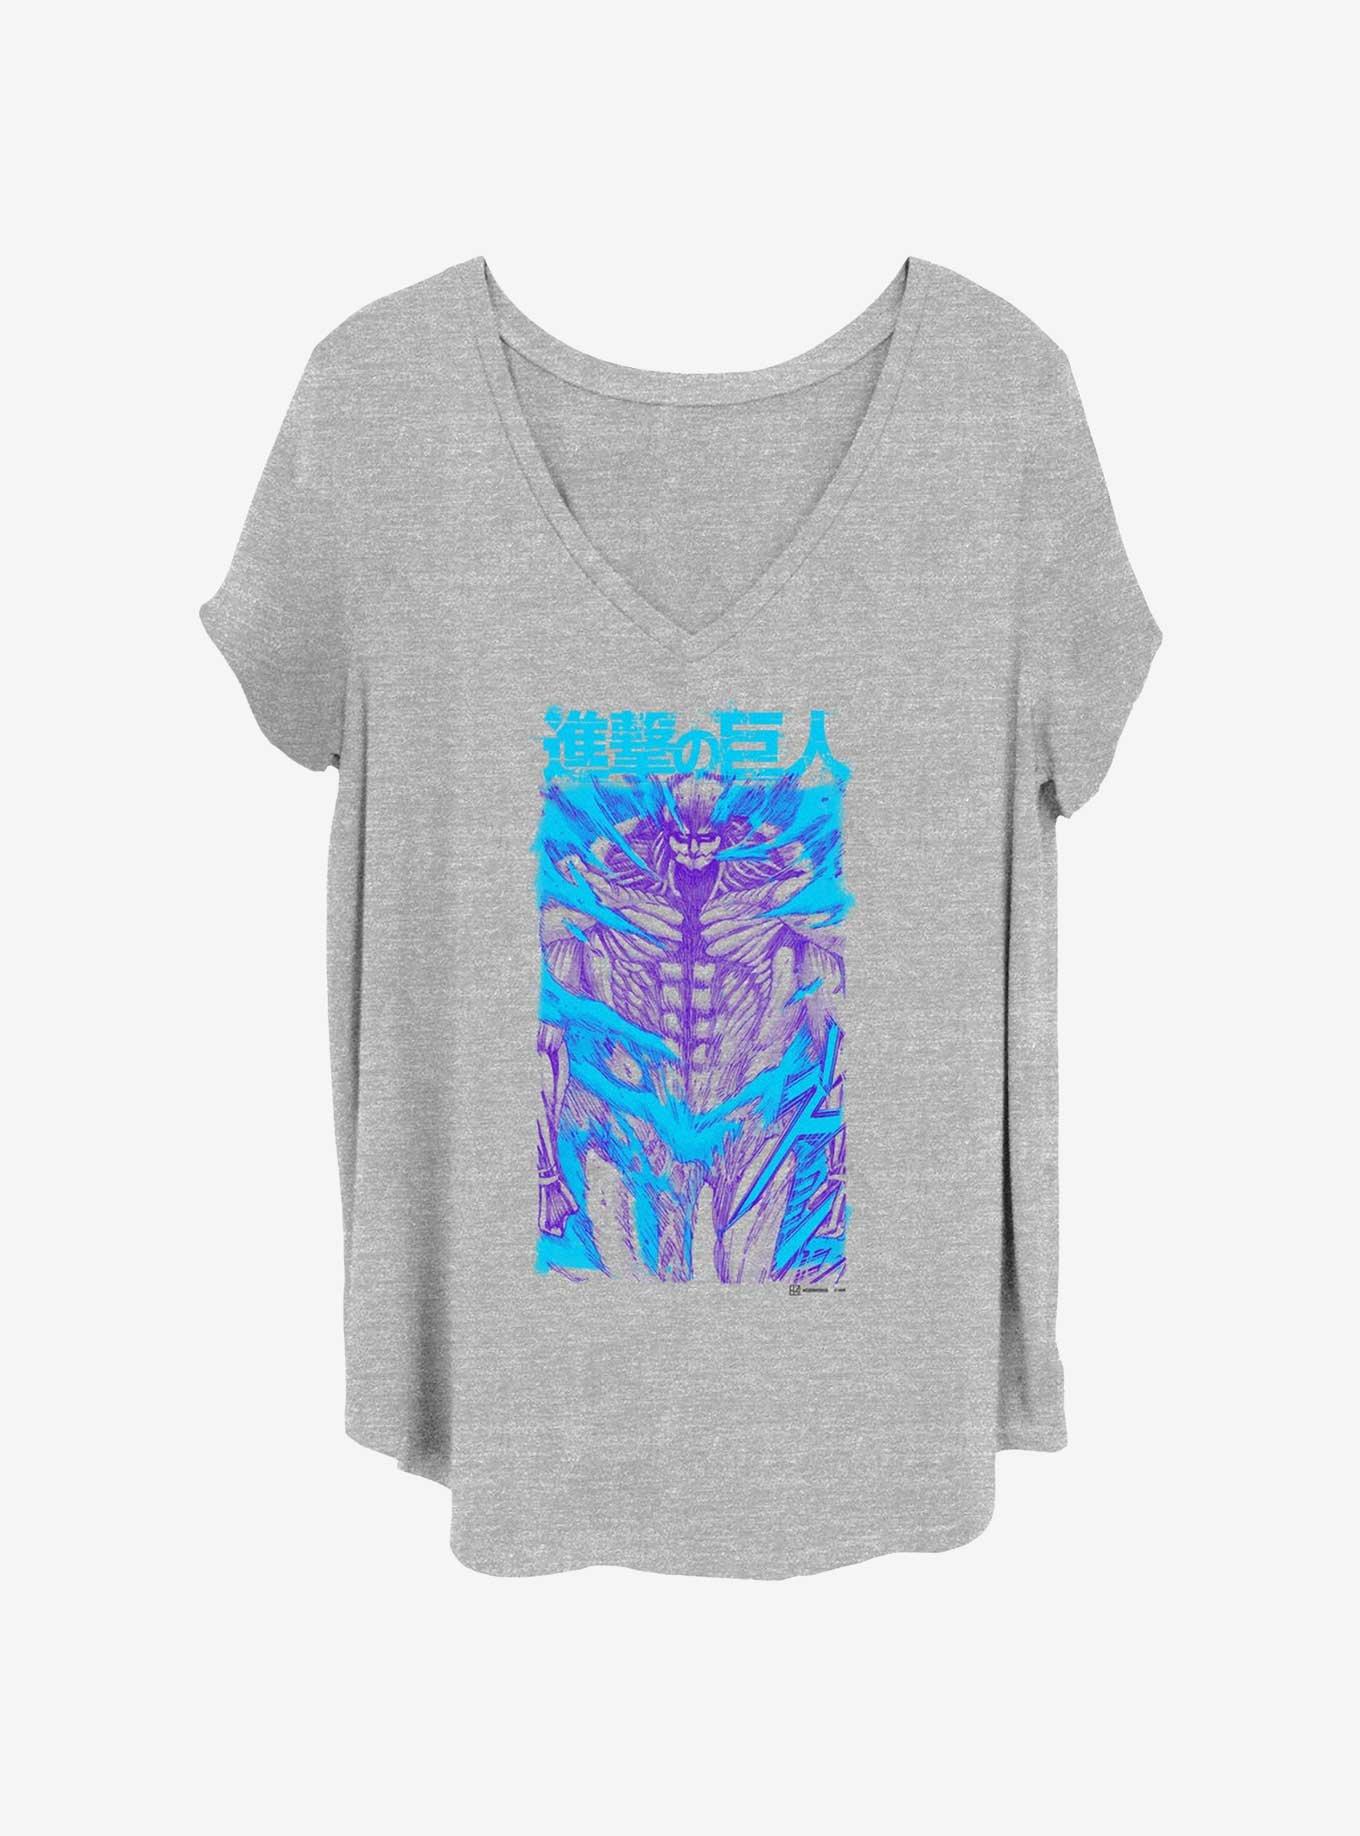 Attack on Titan Armored Titan Overlay Girls T-Shirt Plus Size, HEATHER GR, hi-res